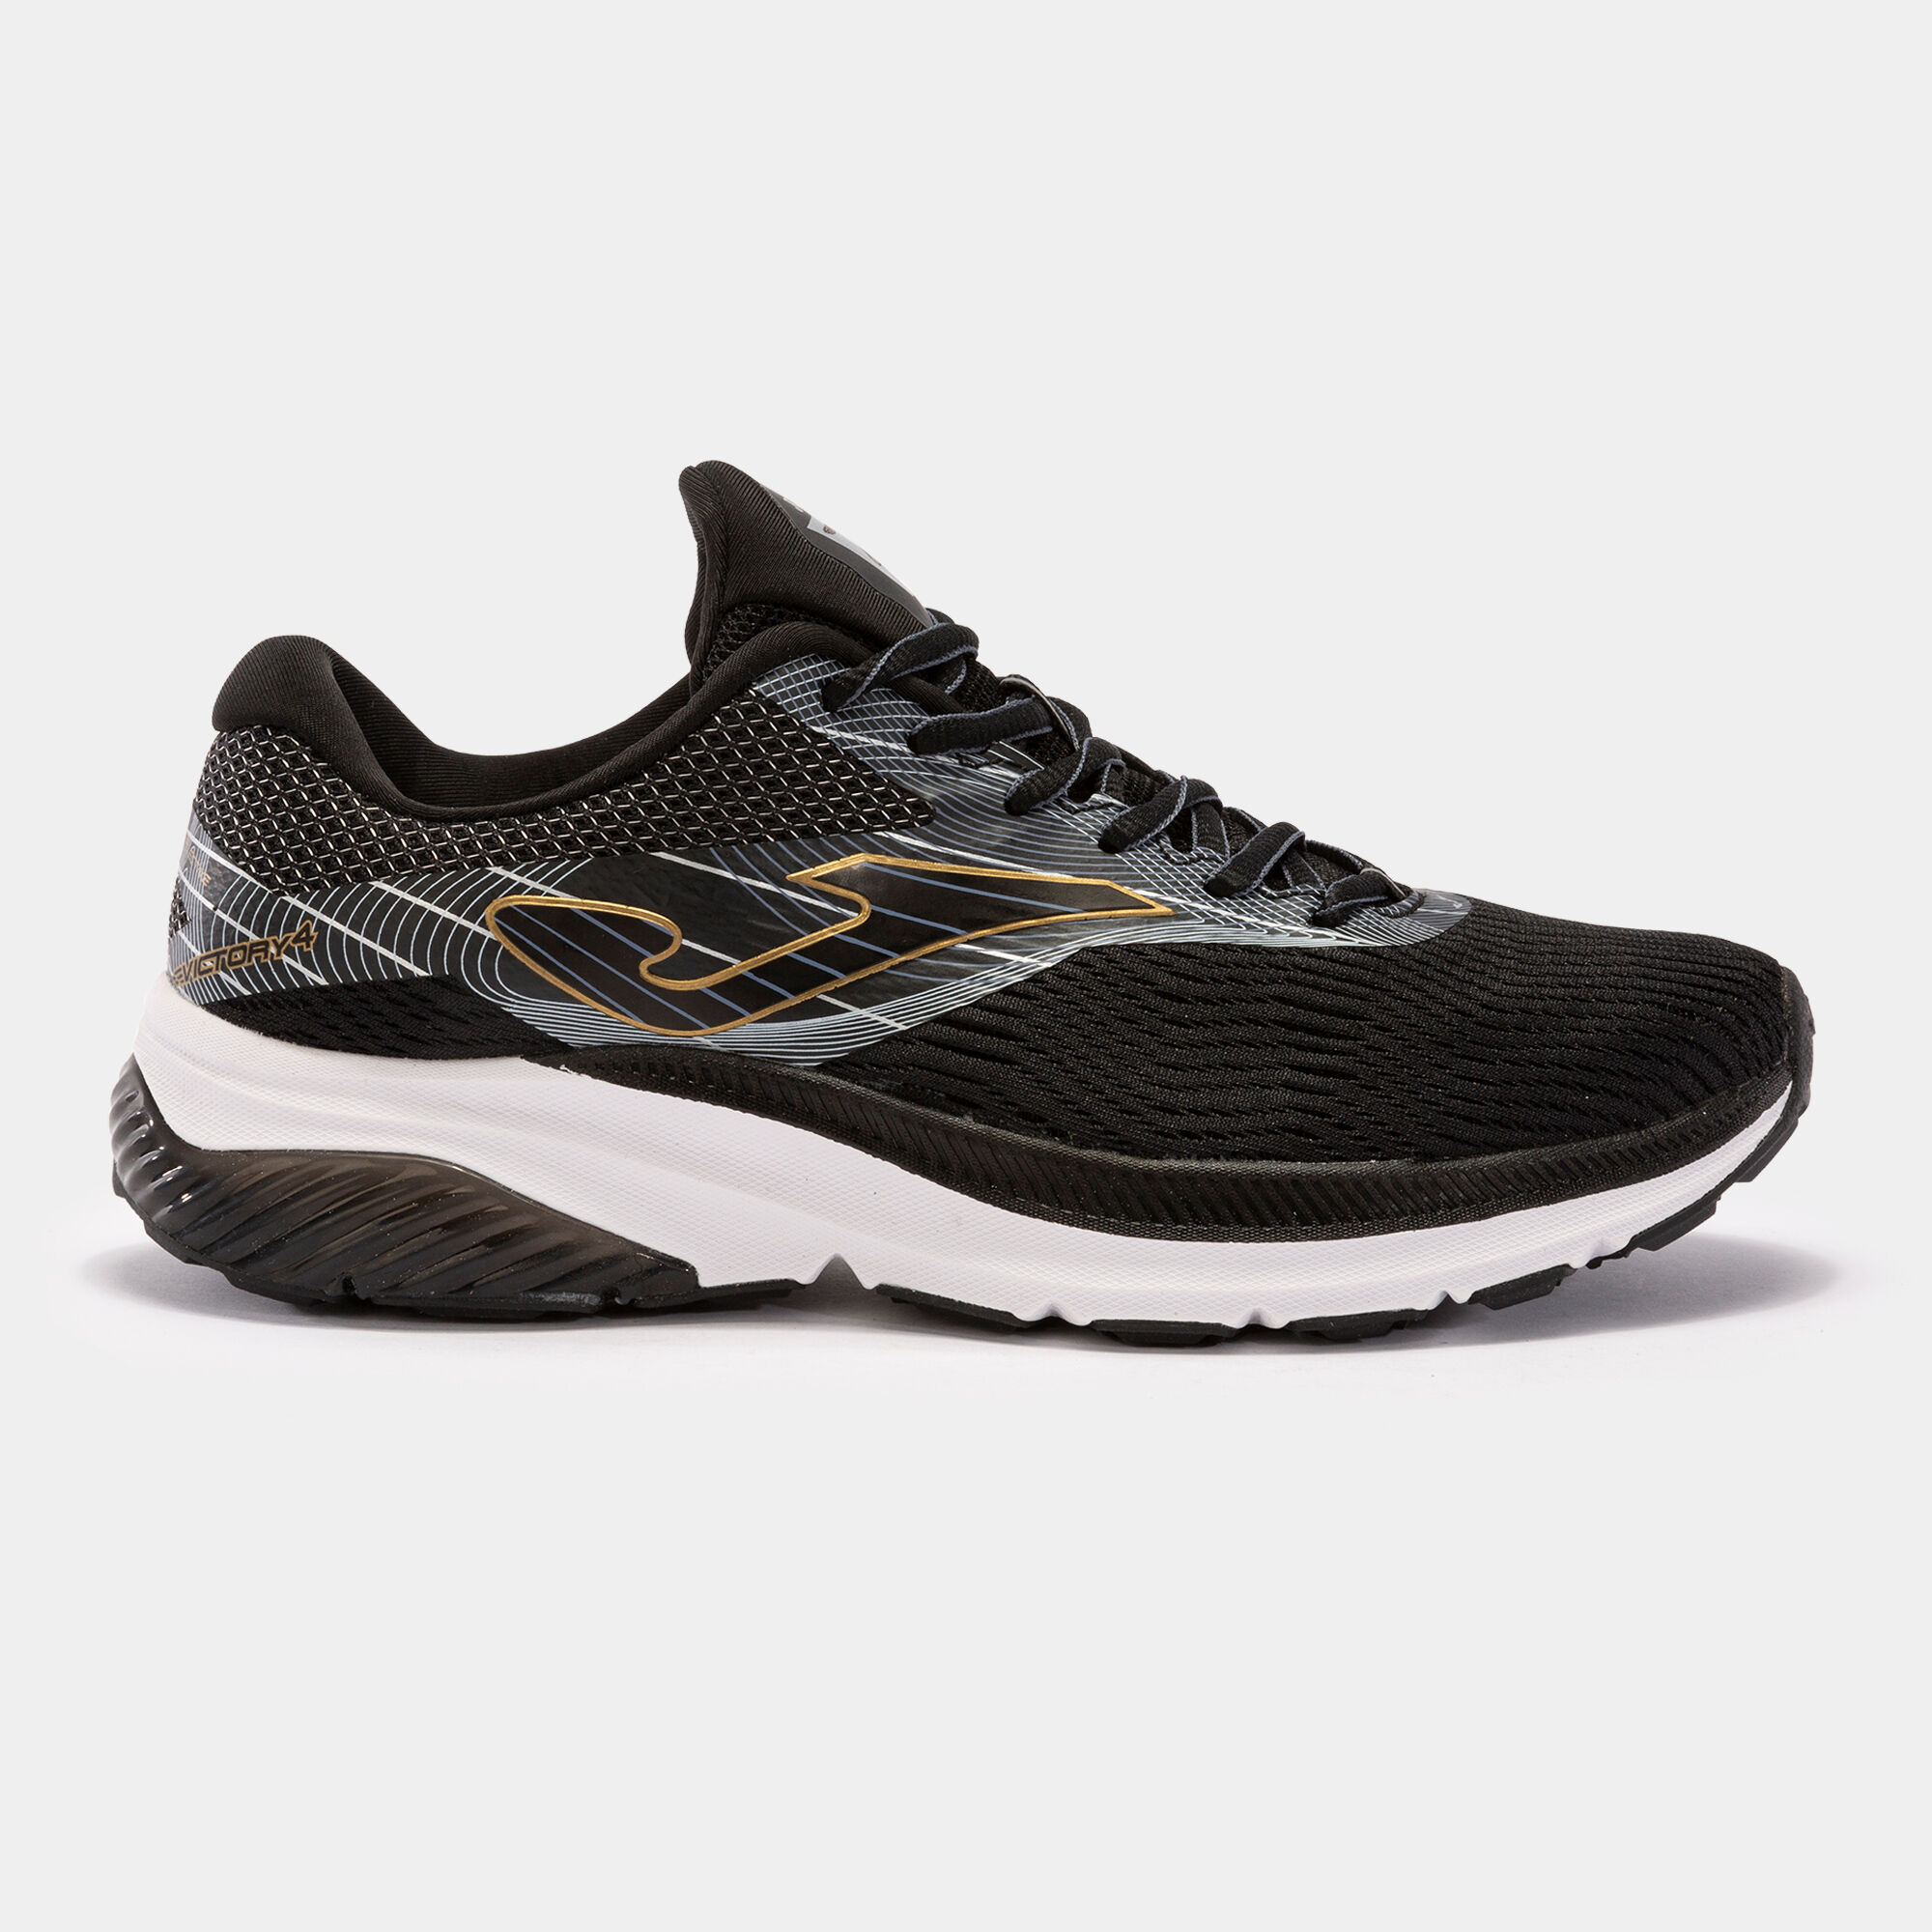 CHAUSSURES RUNNING VICTORY 22 HOMME NOIR OR